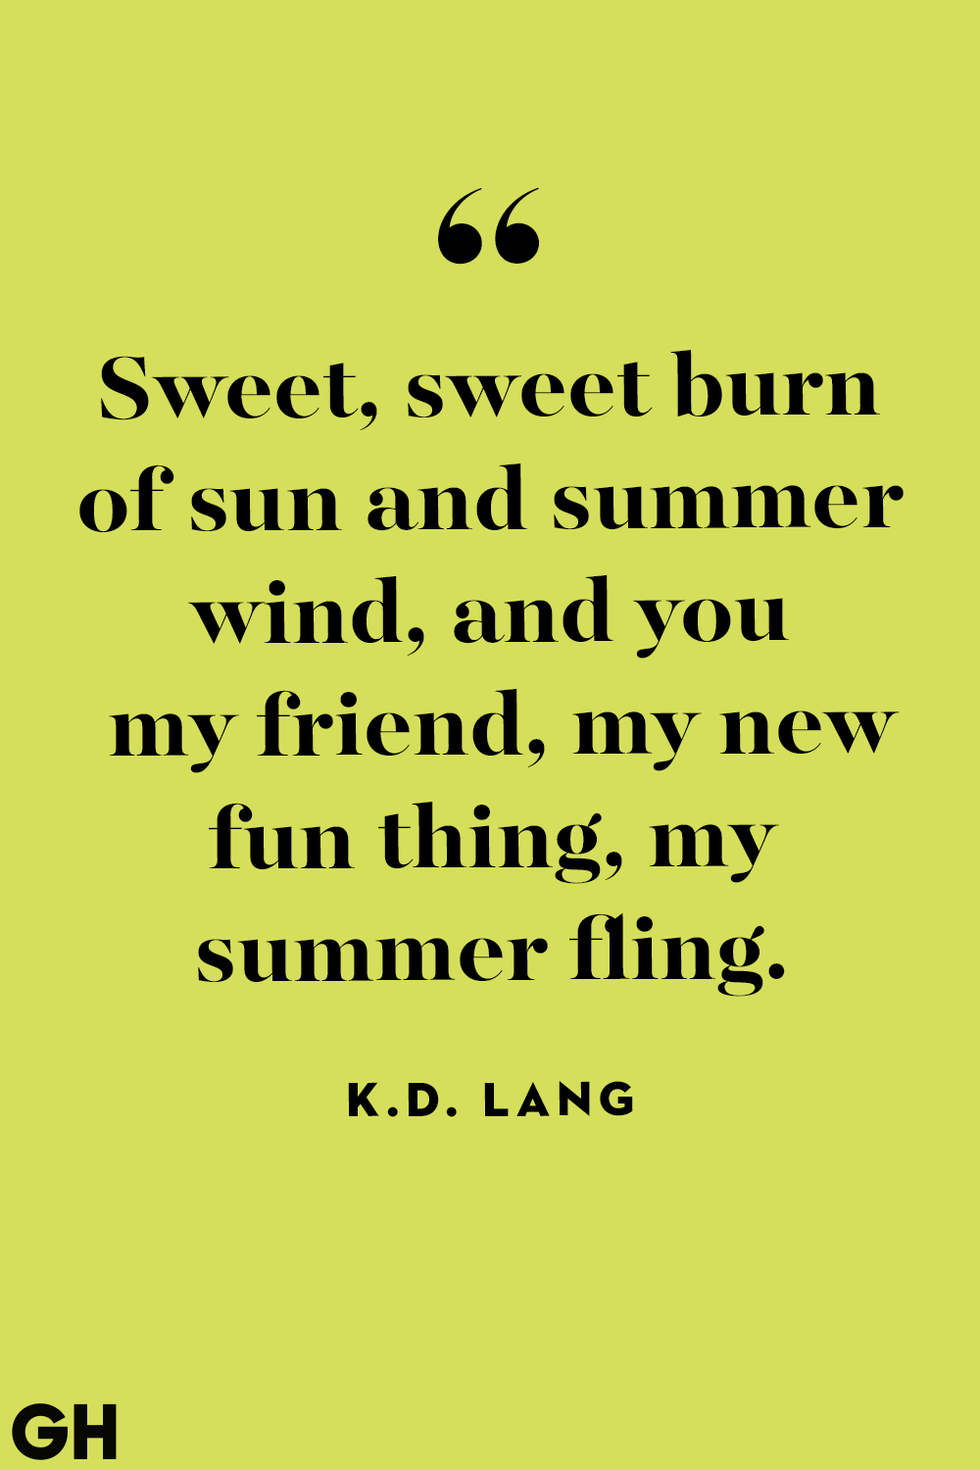 50 Best Summer Quotes Summertime Vibes Sayings